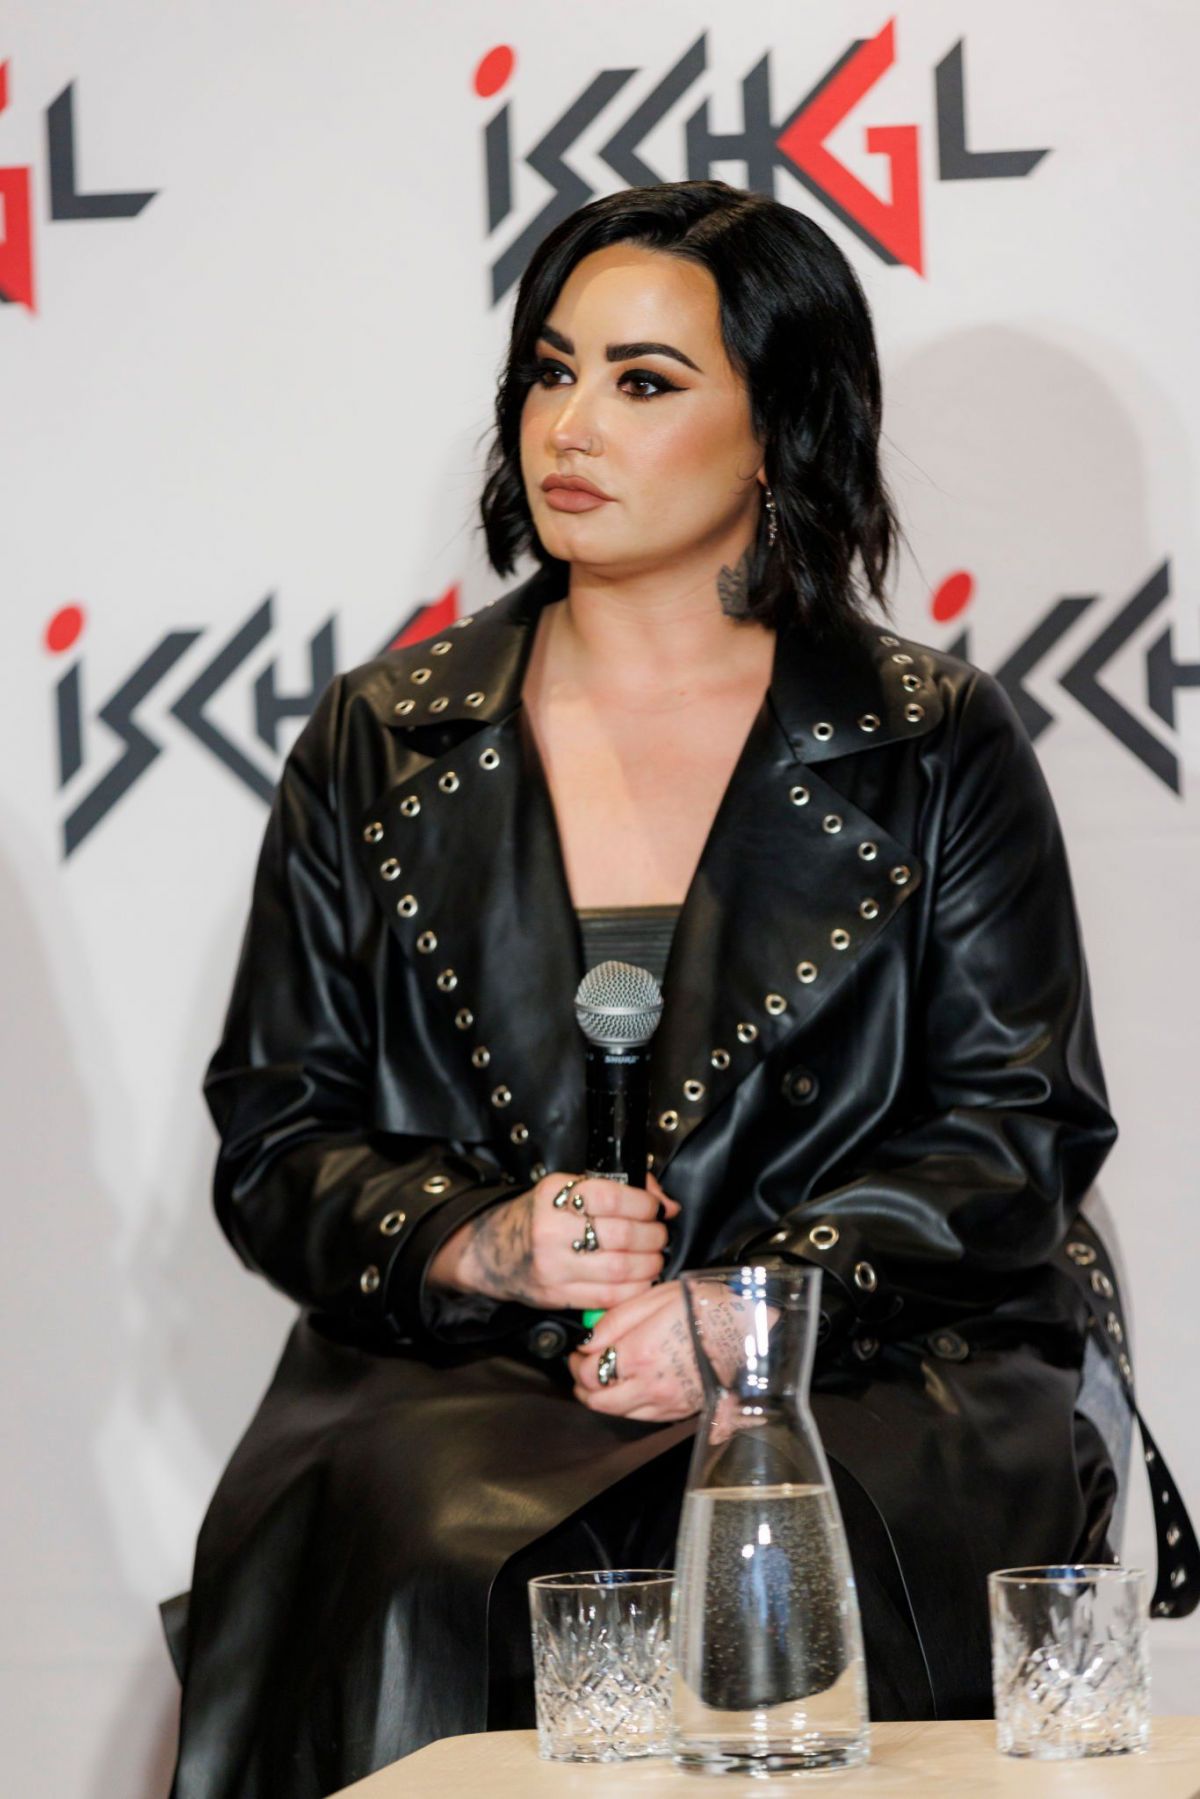 Demi Lovato Gets Cozy in Boots for 'Top of the Mountain' Concert